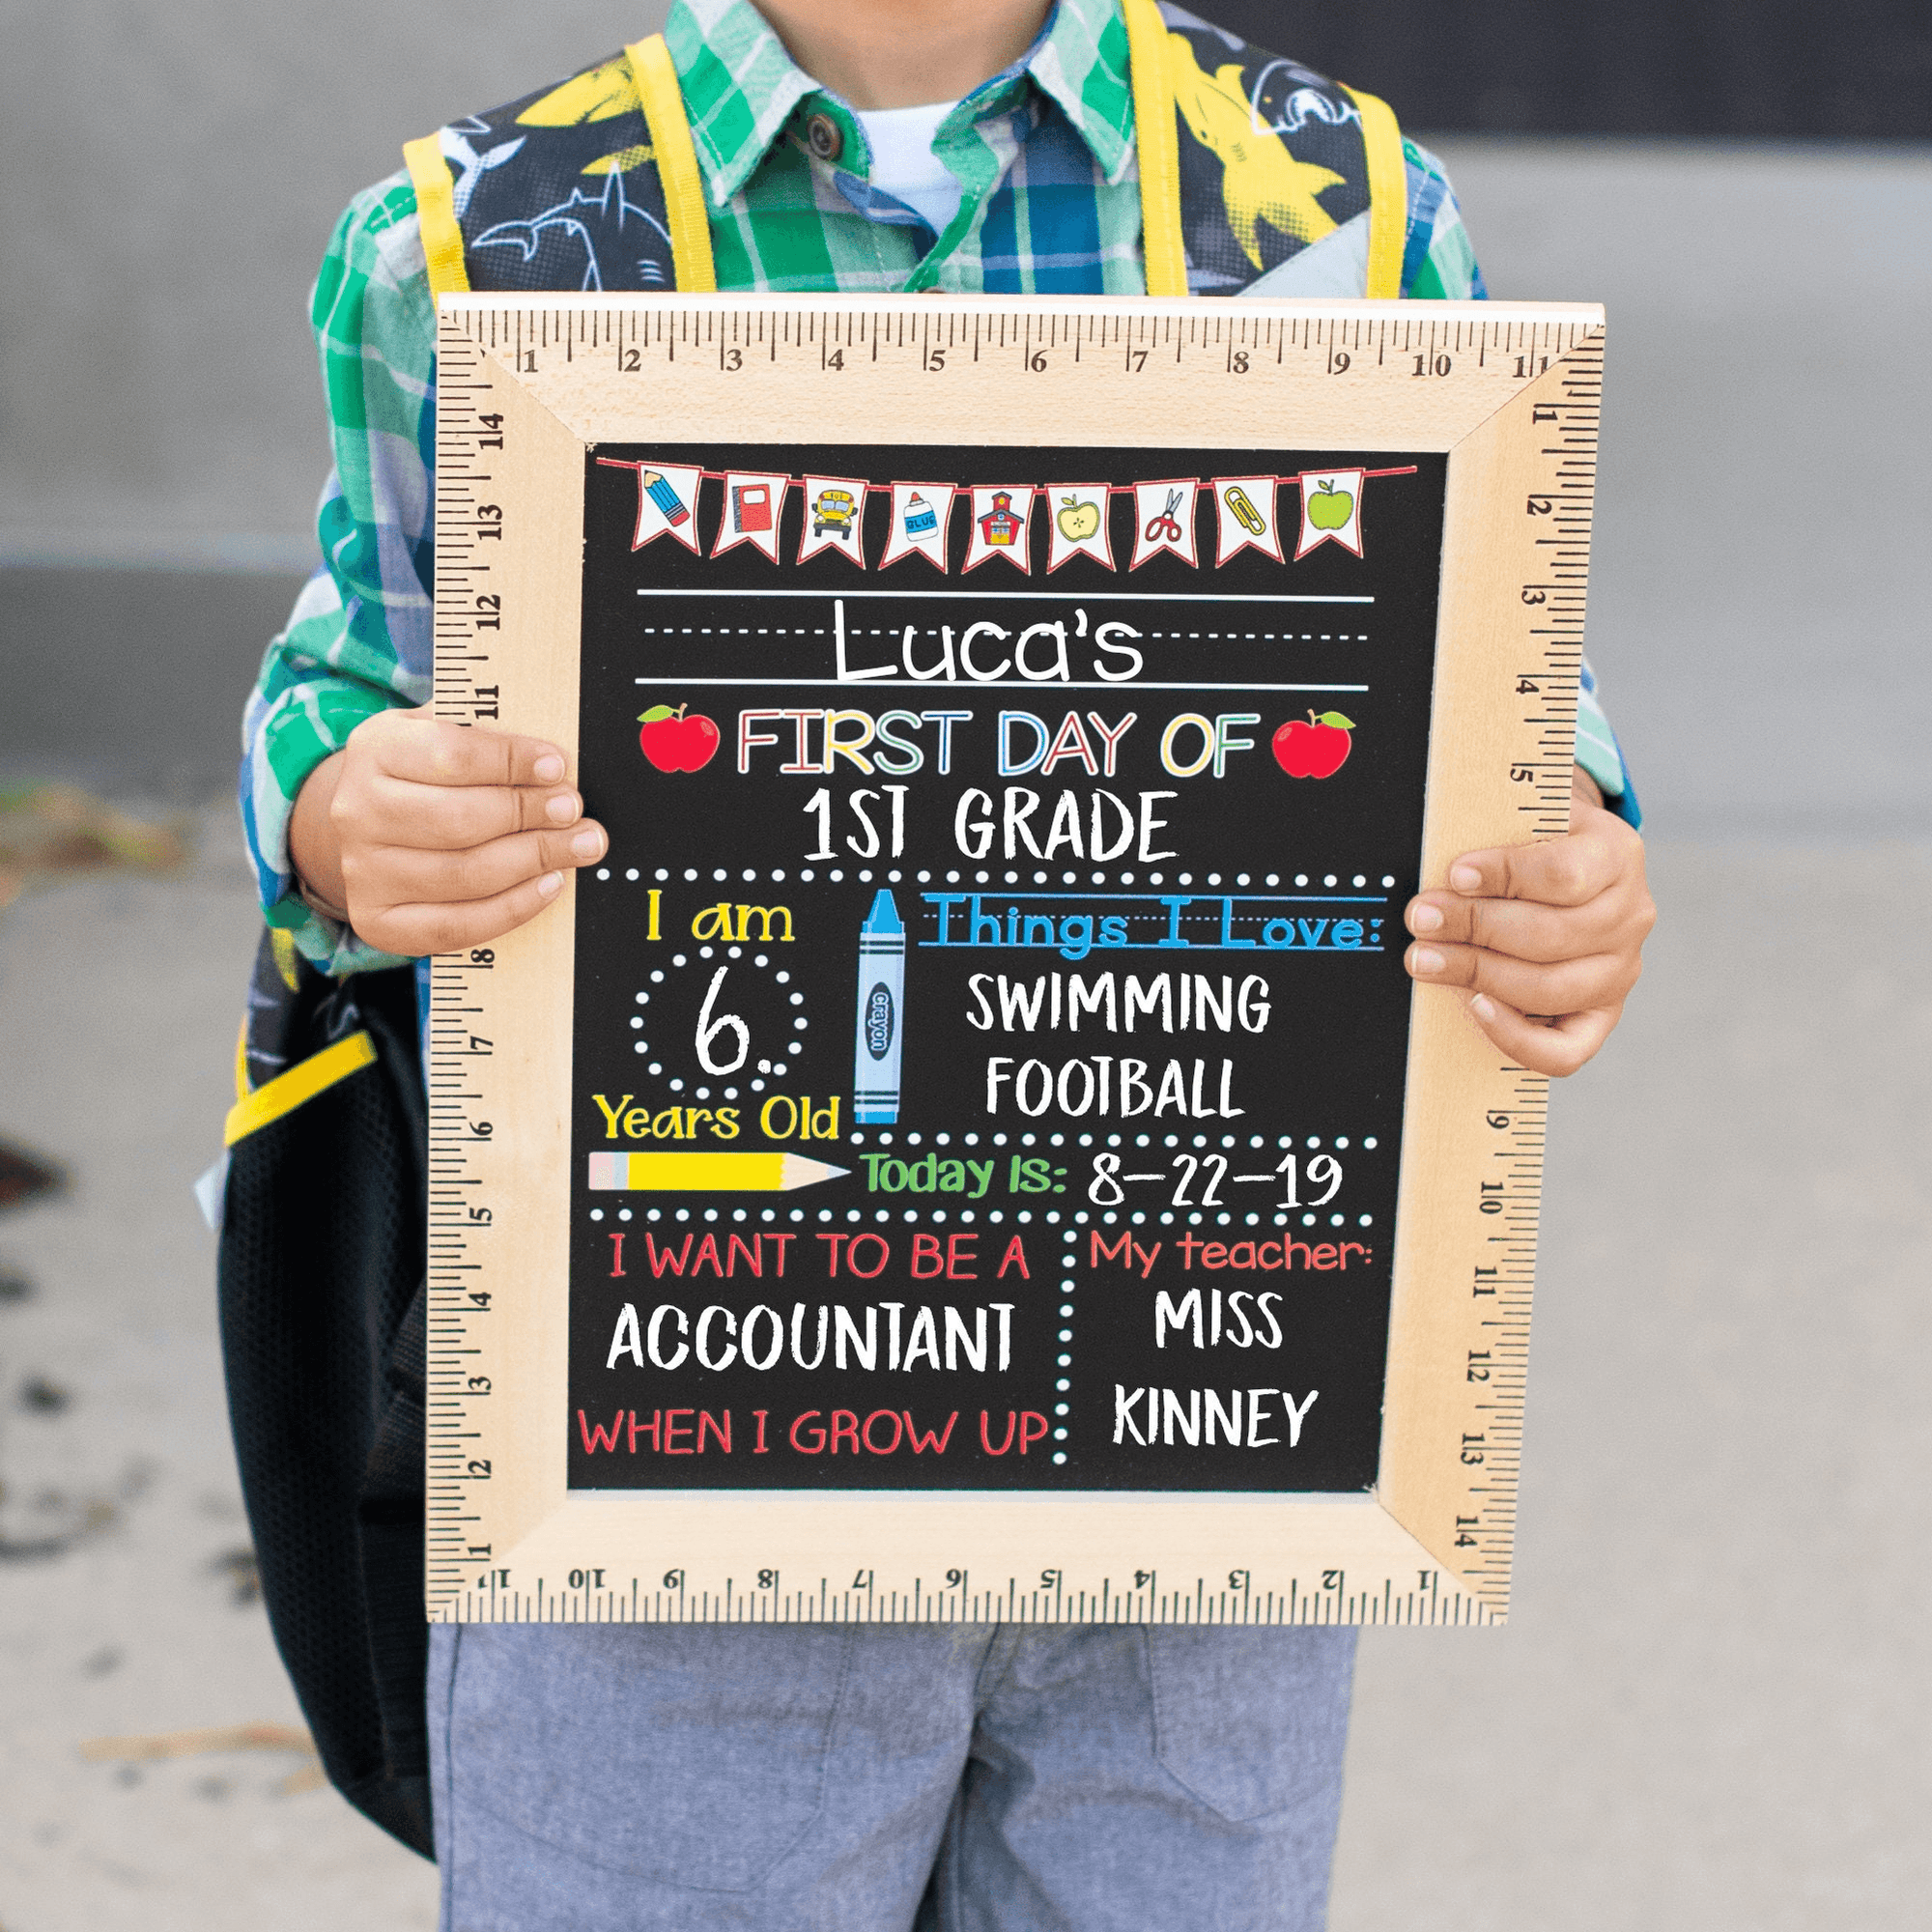 First Day of School Sign, Last Day of School Sign, Back to School Chalkboard, Kindergarten Sign, Personalized Sign, Dry Erase Board, Reusable Chalkboard Sign